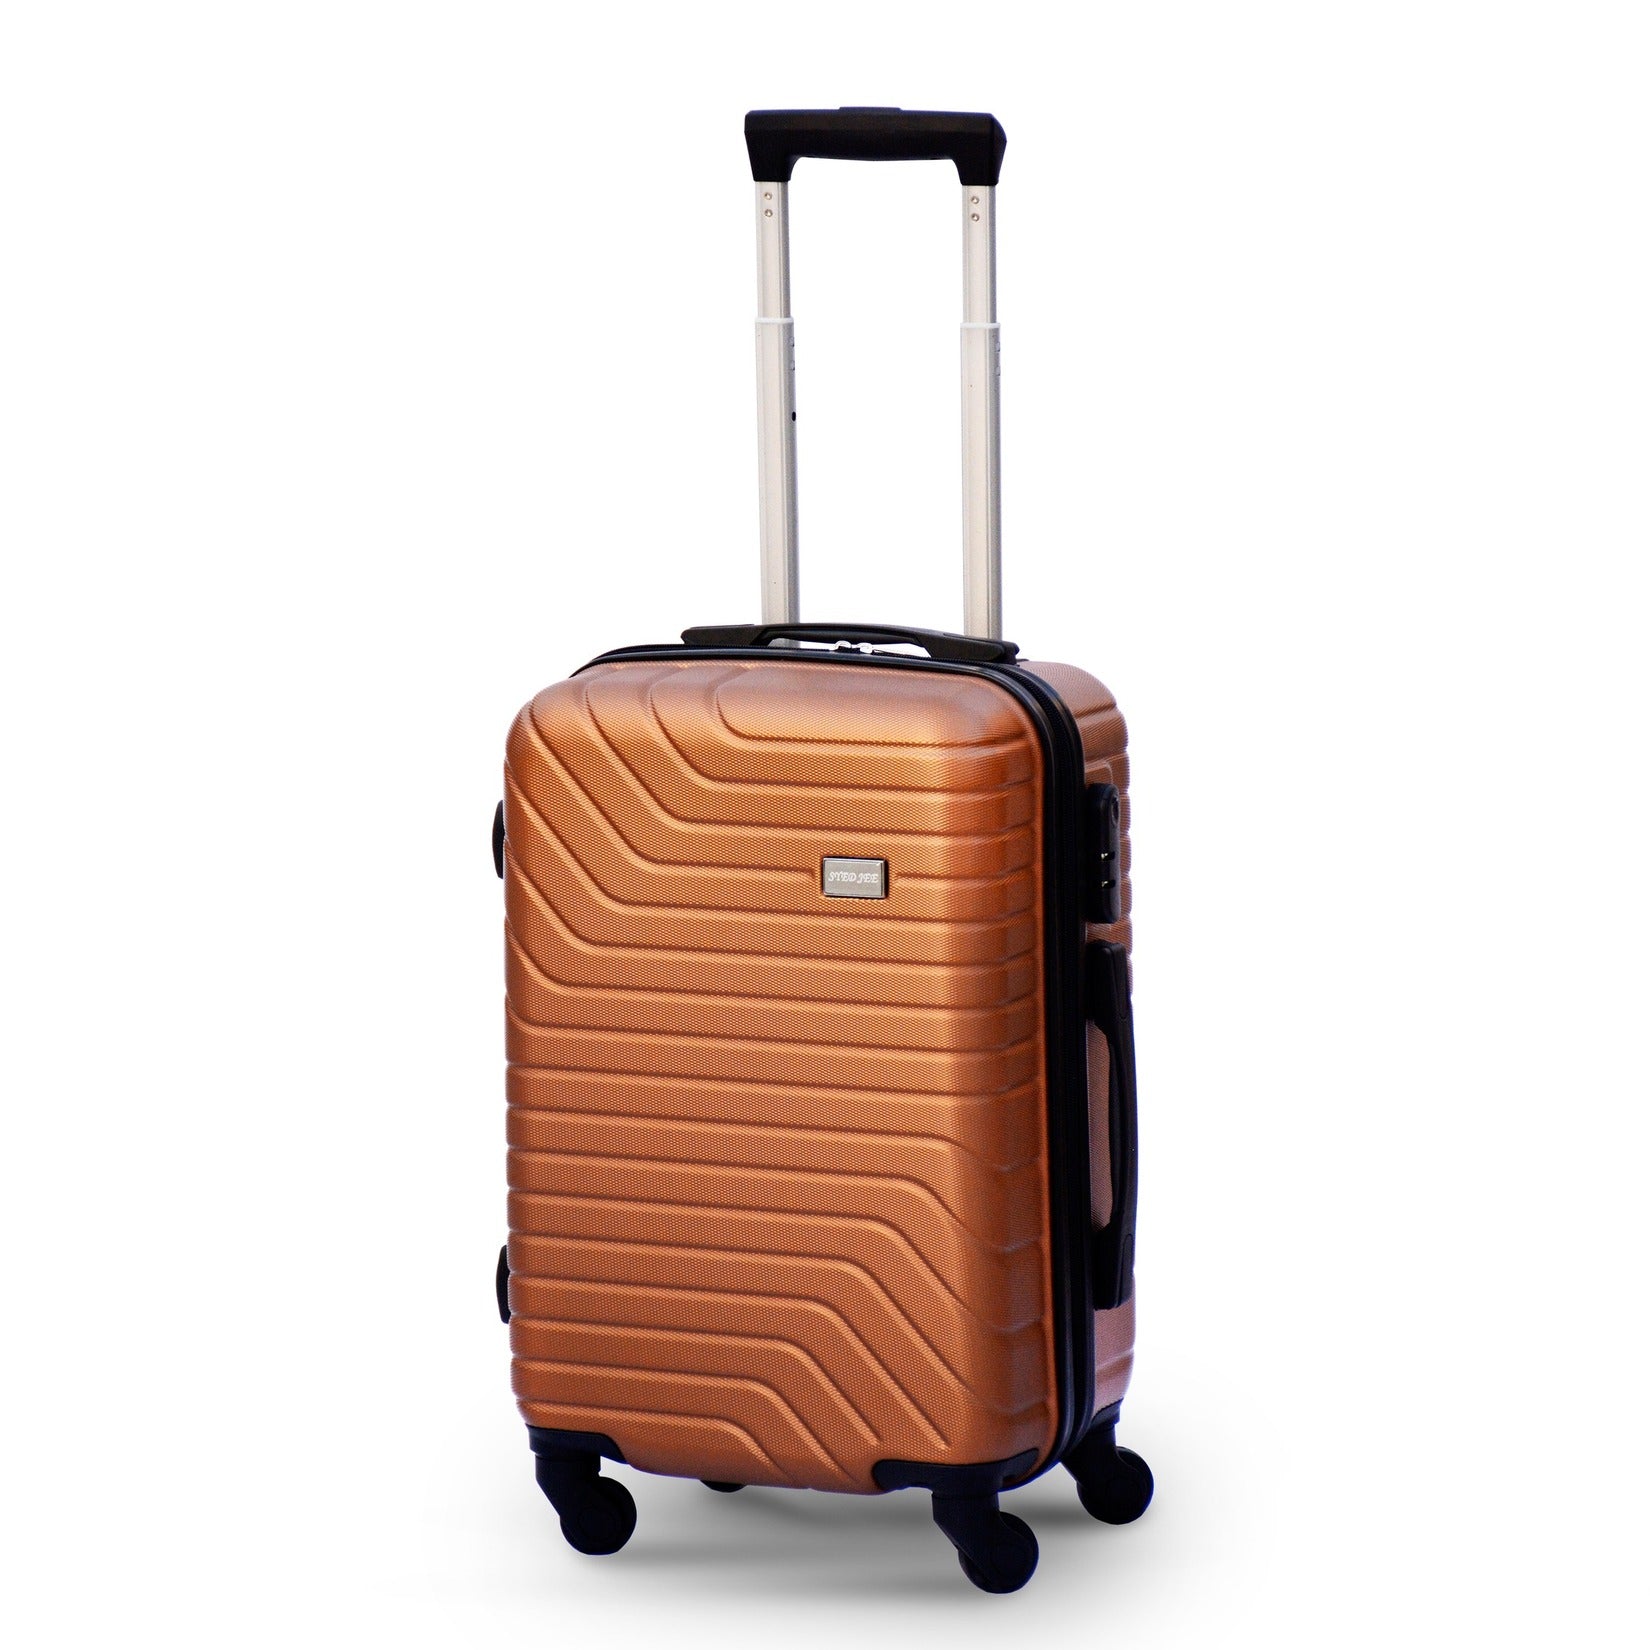 24" Coffee Colour SJ ABS Luggage Lightweight Hard Case Trolley Bag with Spinner Wheel